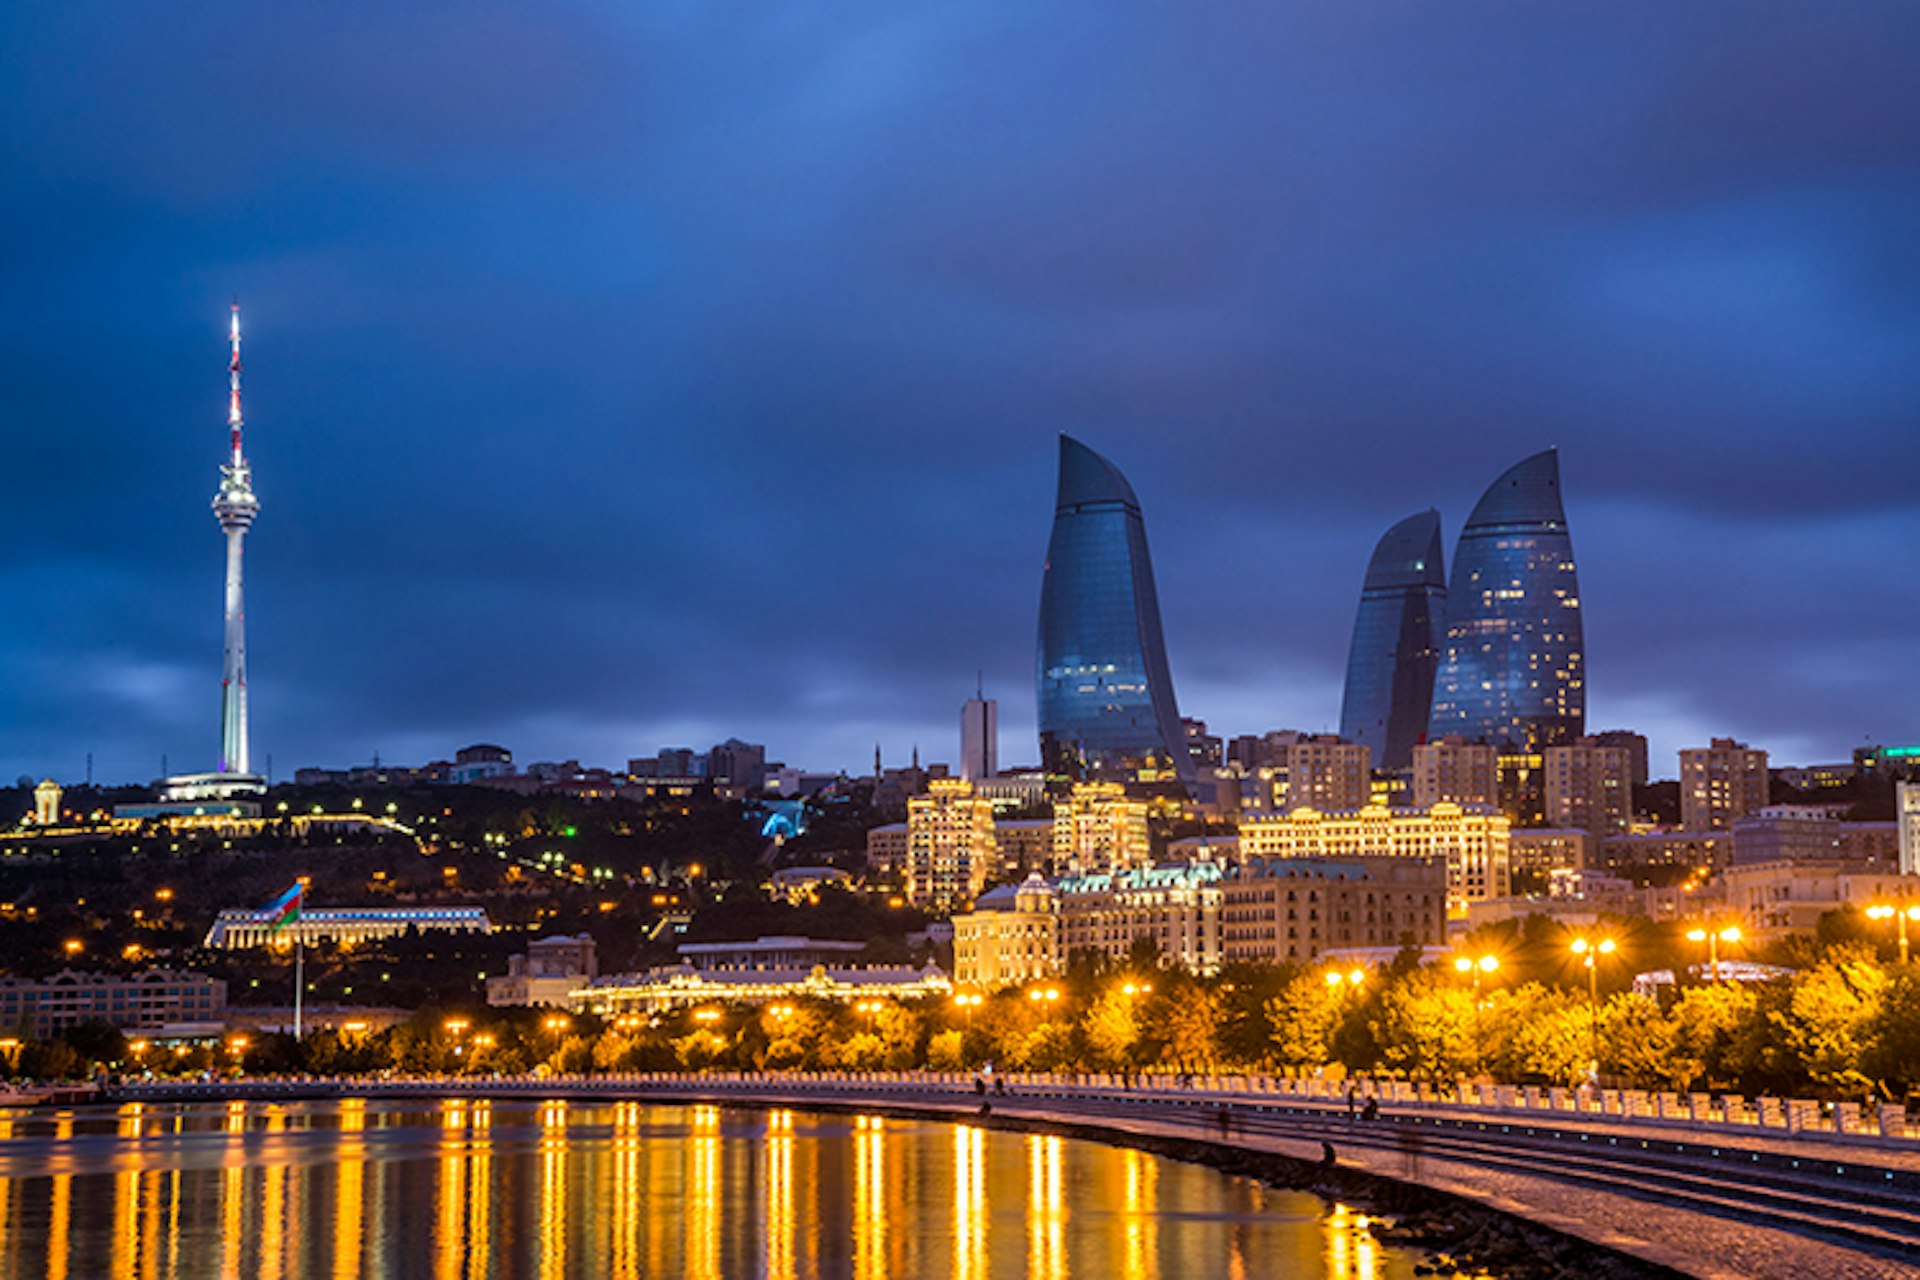 Baku's skyline contains some striking modern architecture. Image by Wilfred Y Wong / Photographer's Choice RF / Getty Image